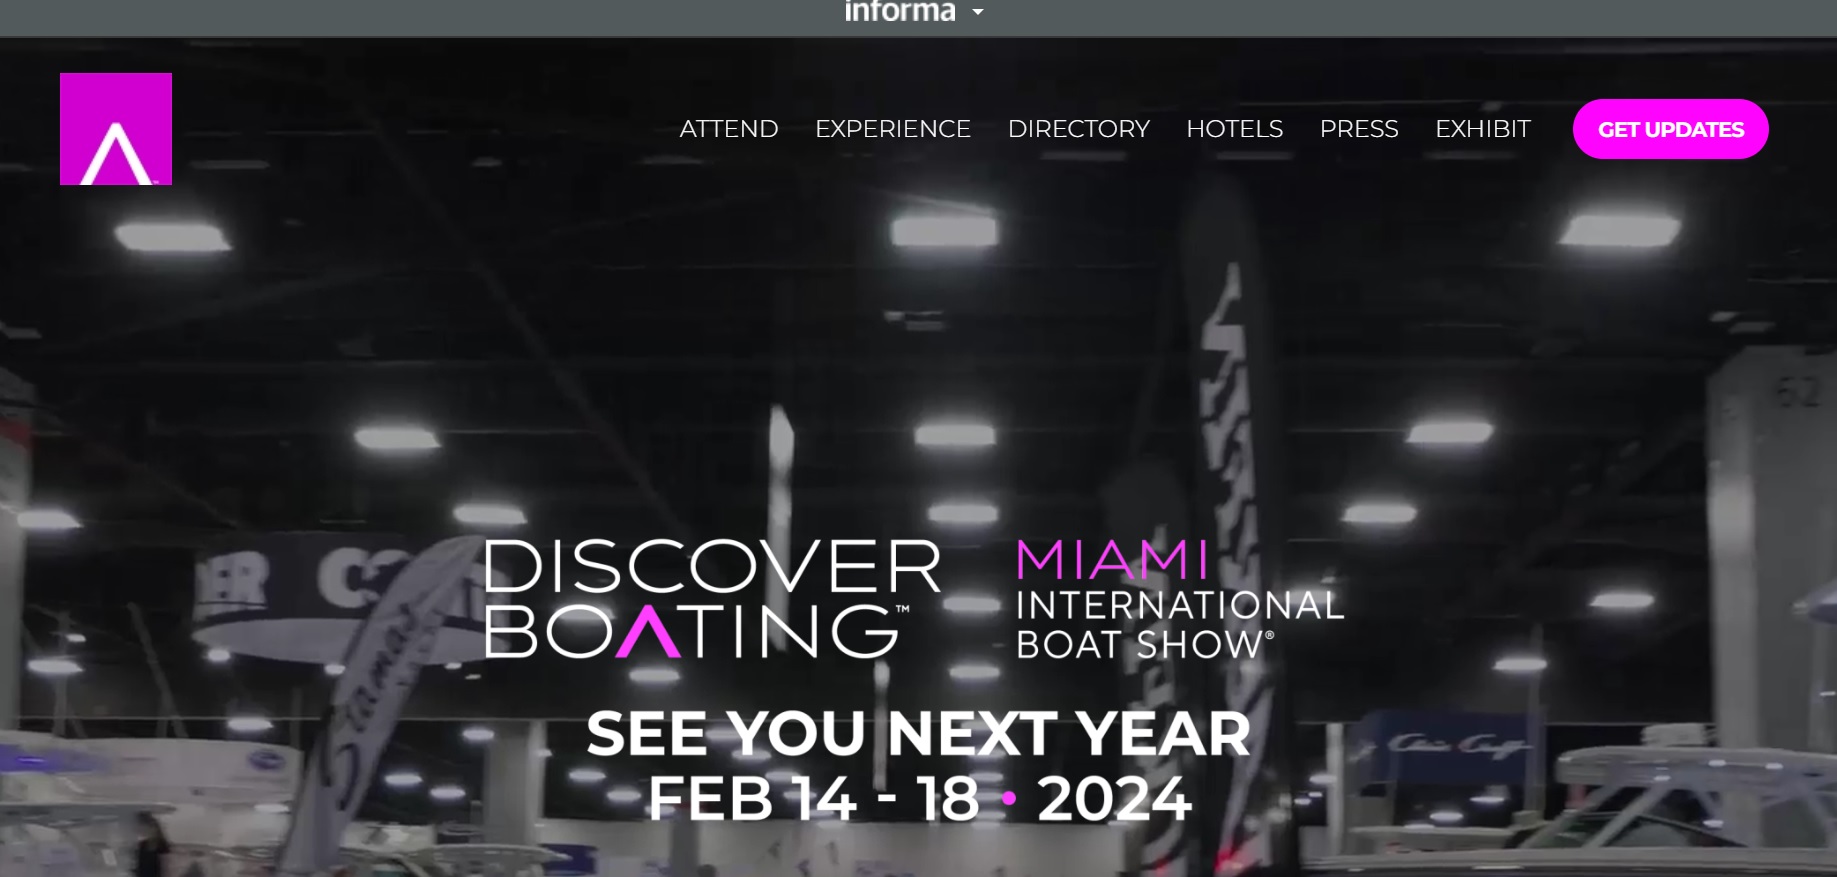 Miami International boat show - video marketing for boat shows